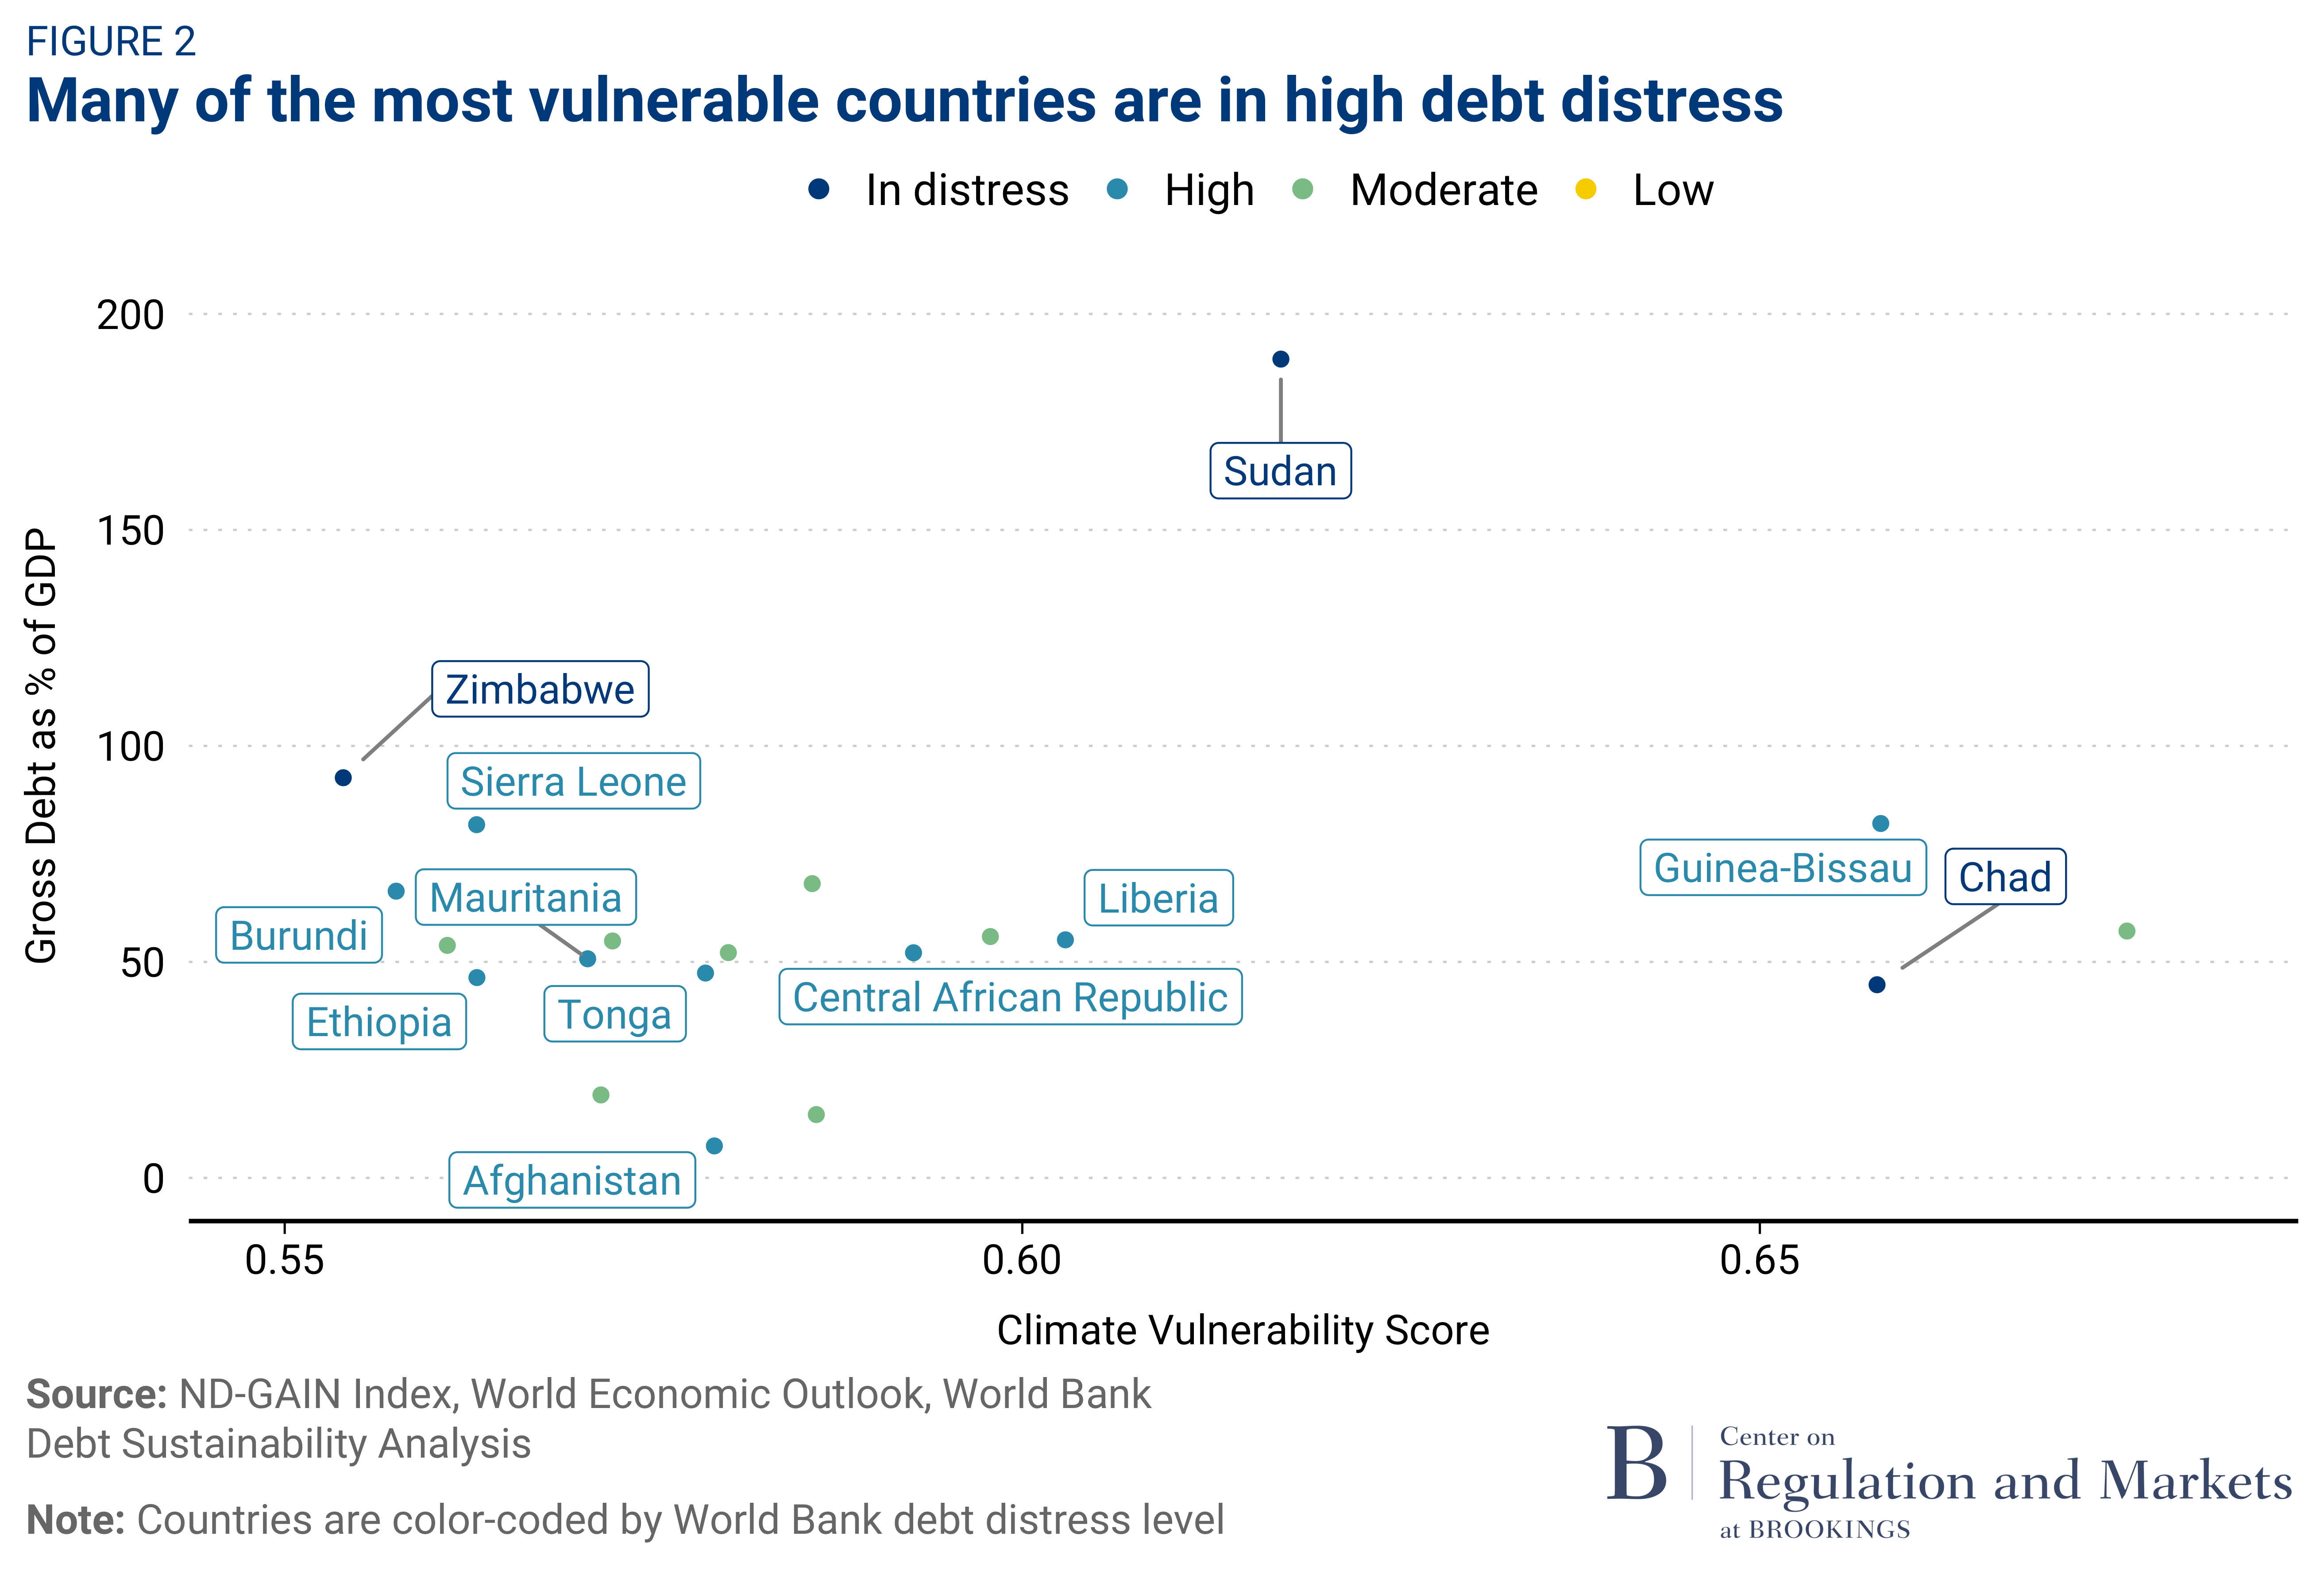 The most vulnerable countries are in high debt distress